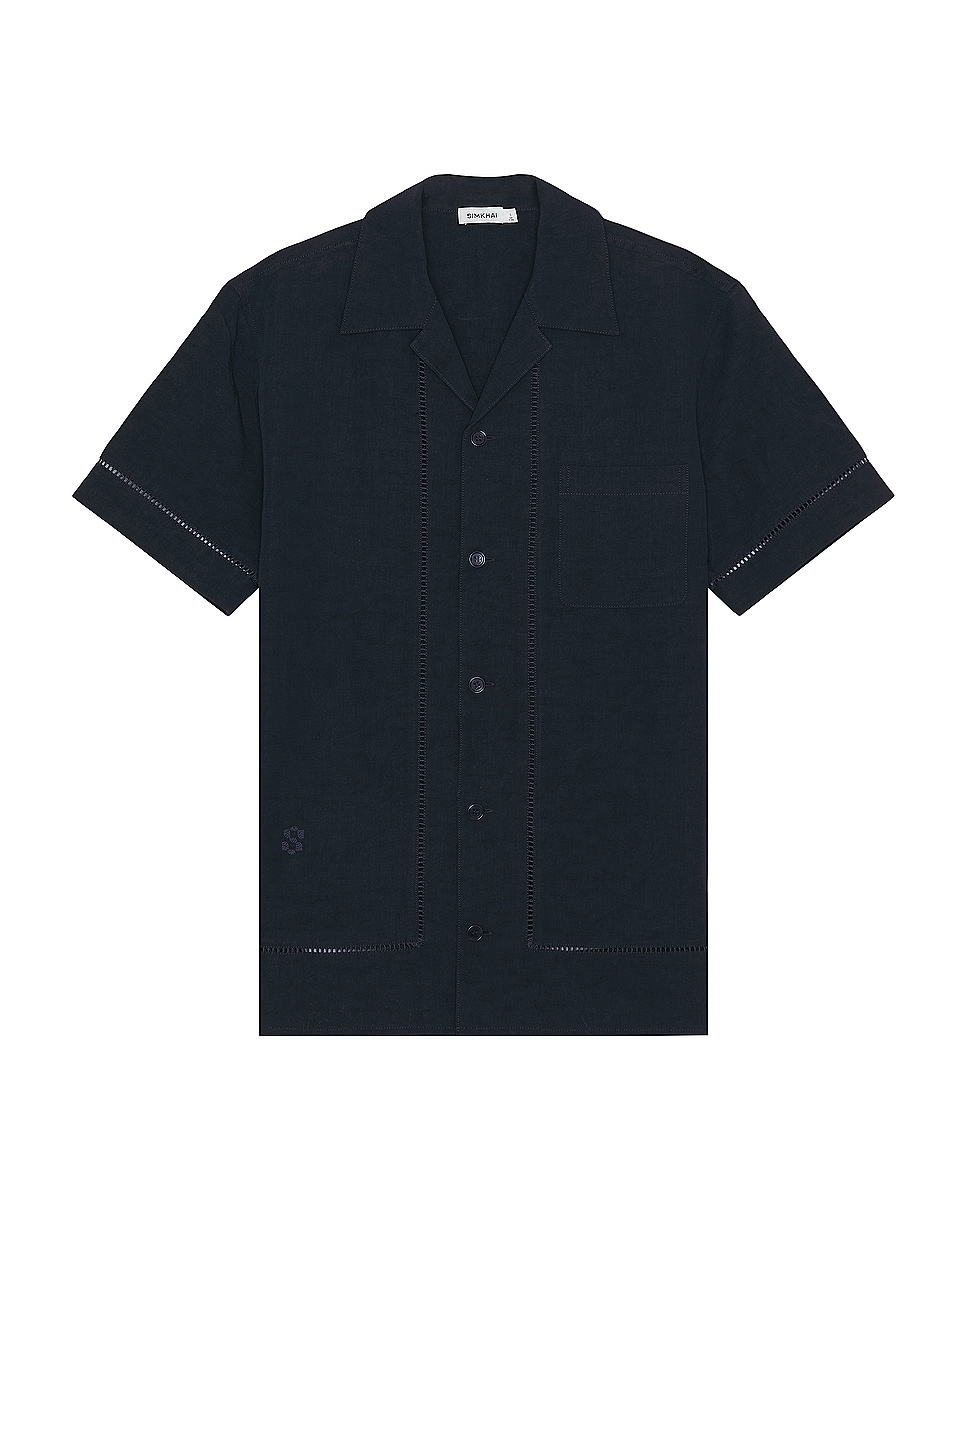 Image 1 of SIMKHAI Marco Camp Shirt in Midnight